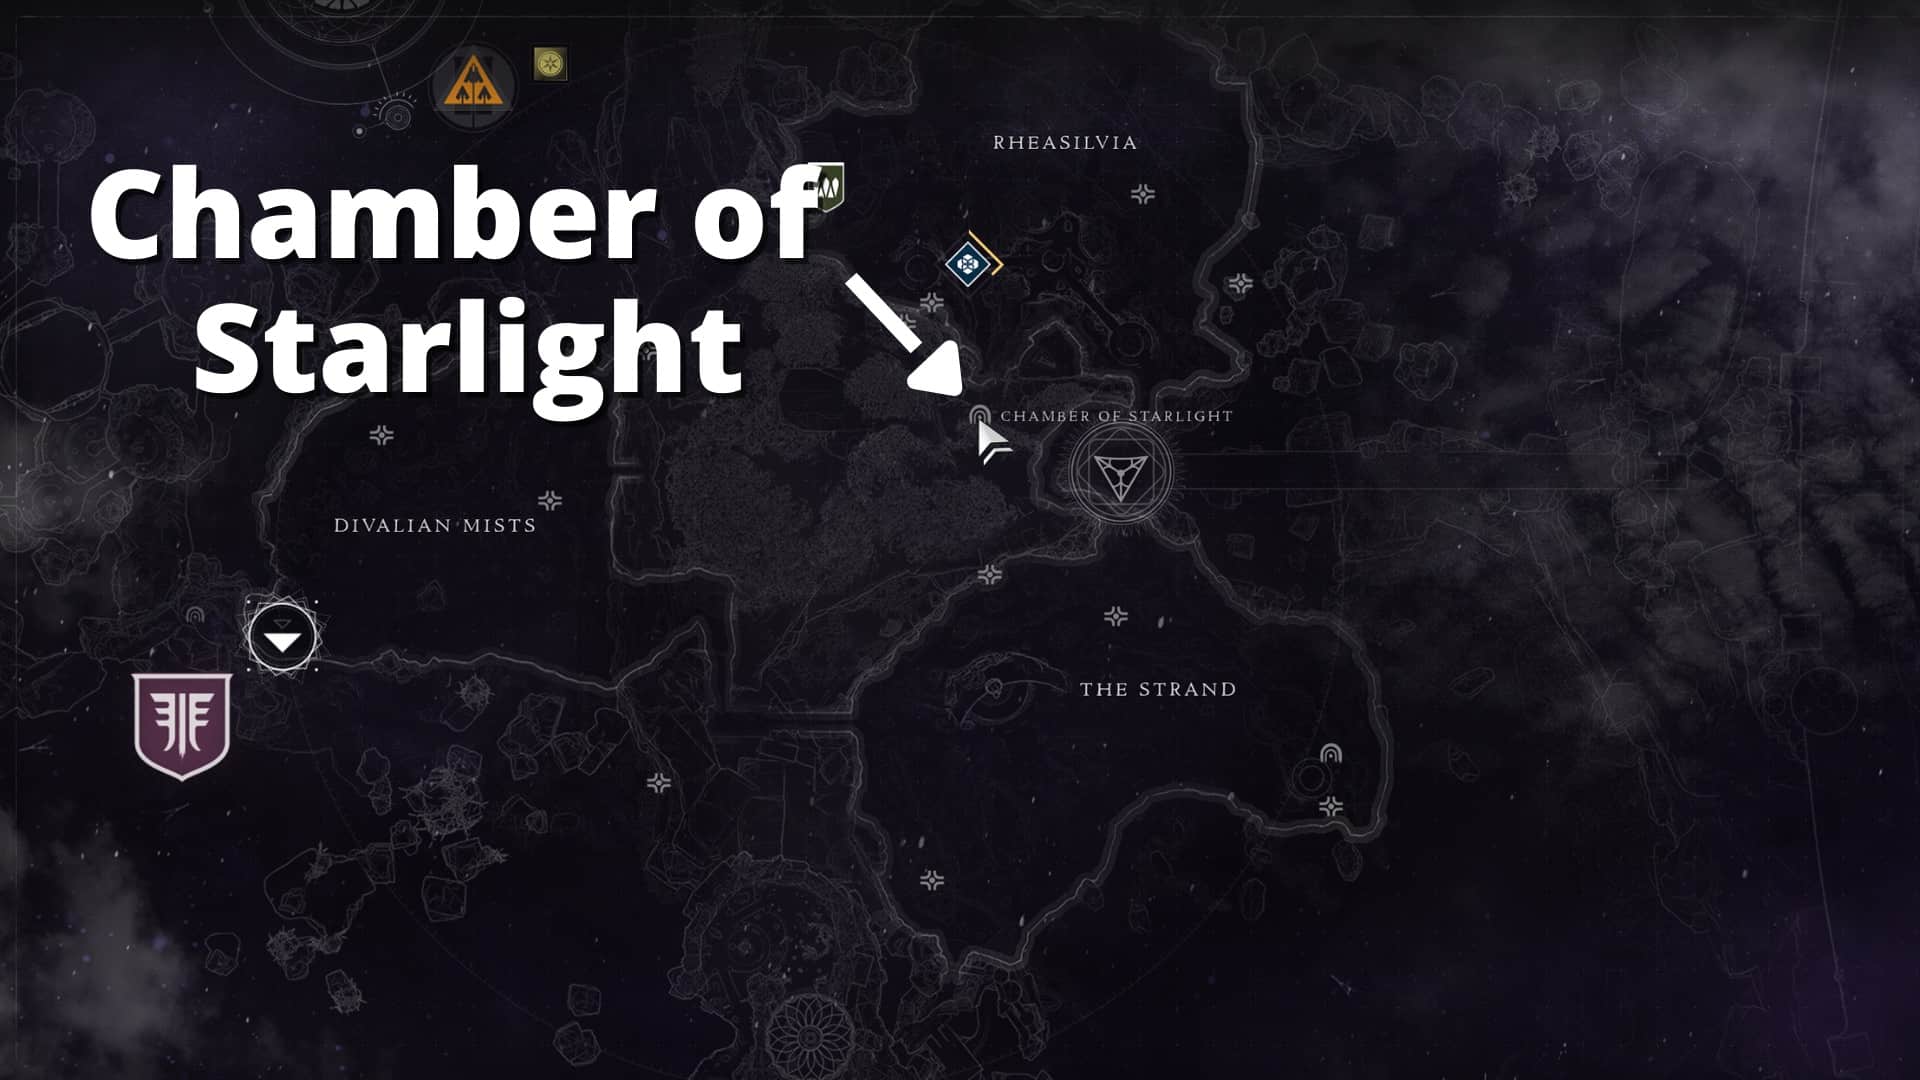 Chamber of Starlight Lost Sector location